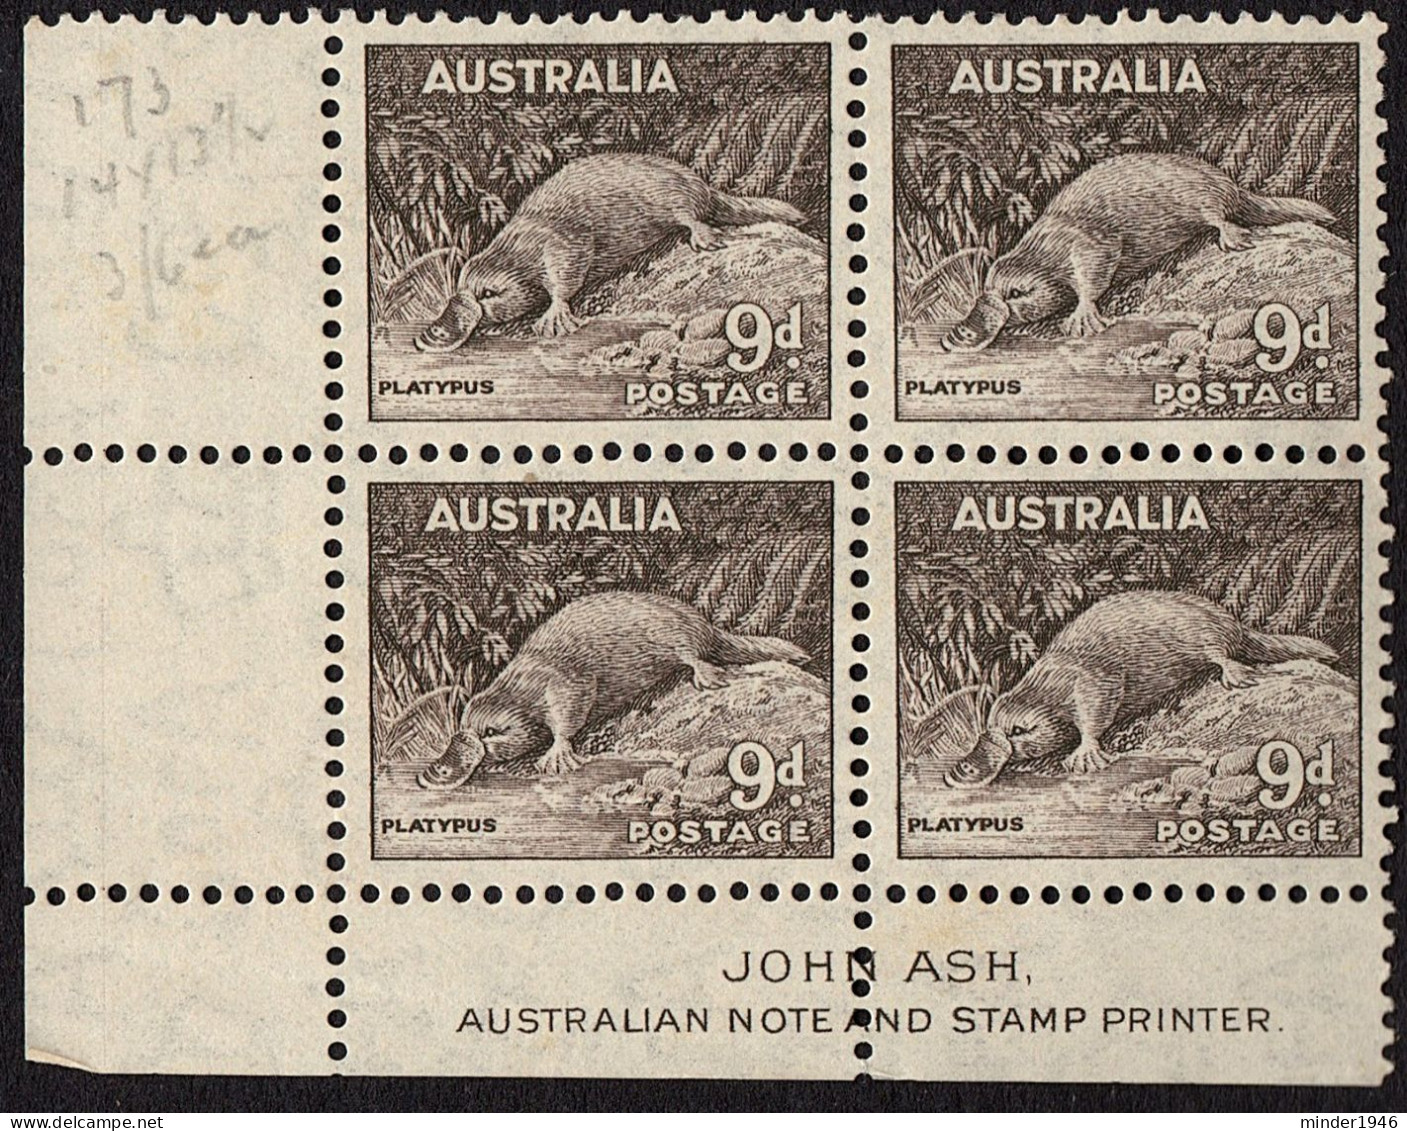 AUSTRALIA 1938 KGVI 9d X 4 Block, Chocolate SG173 MNH With Bottom & Side Gutter - Mint Stamps